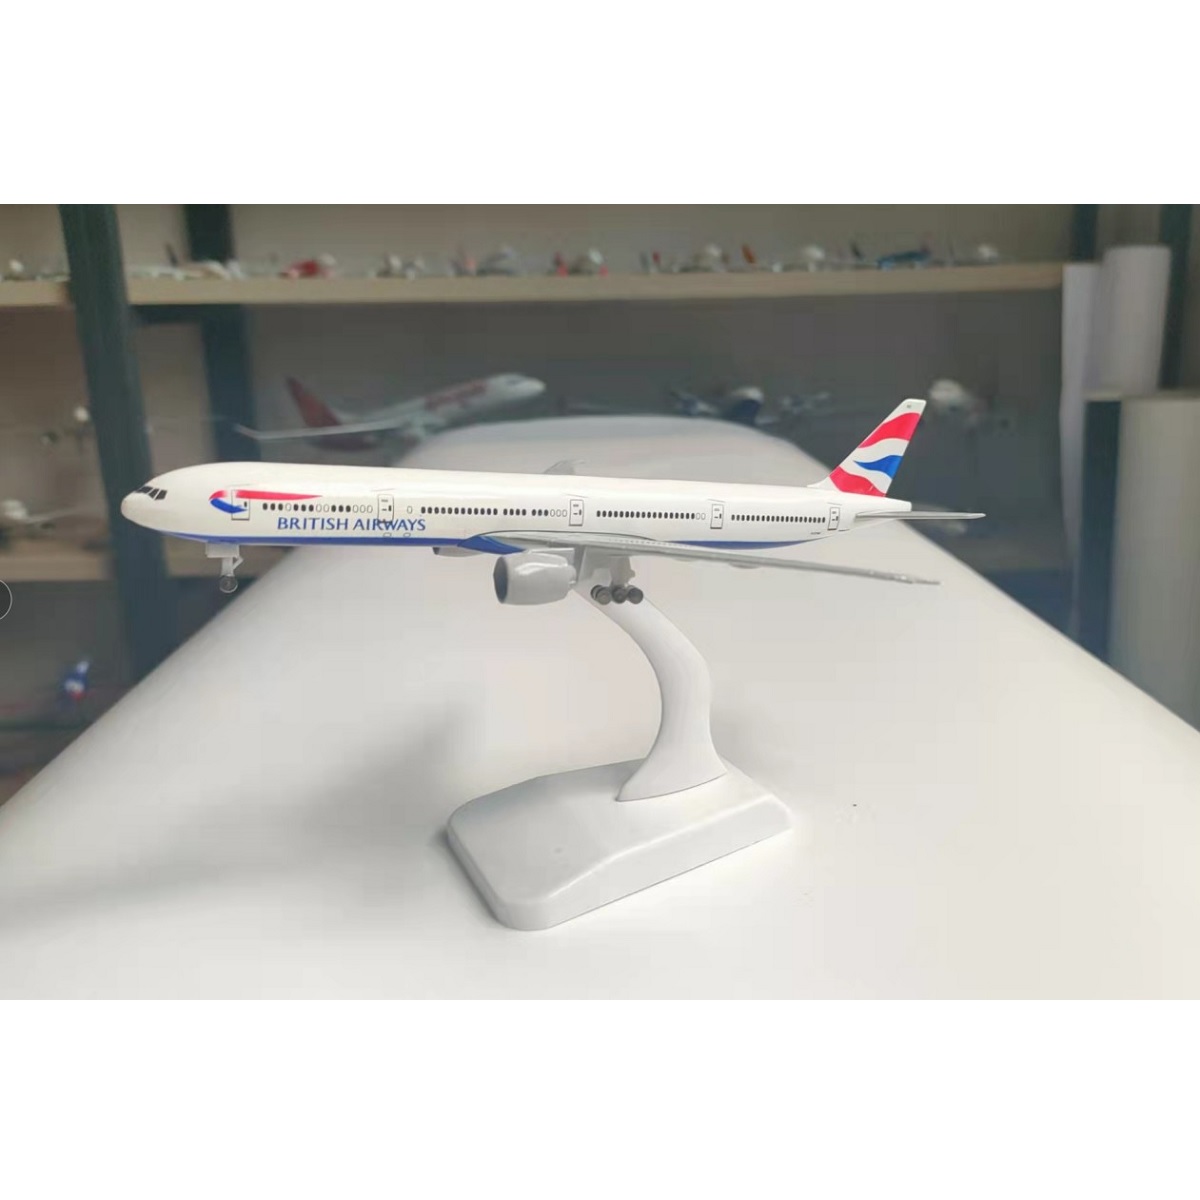 British Airways Airbus A380 Replica Toy Model with Stand